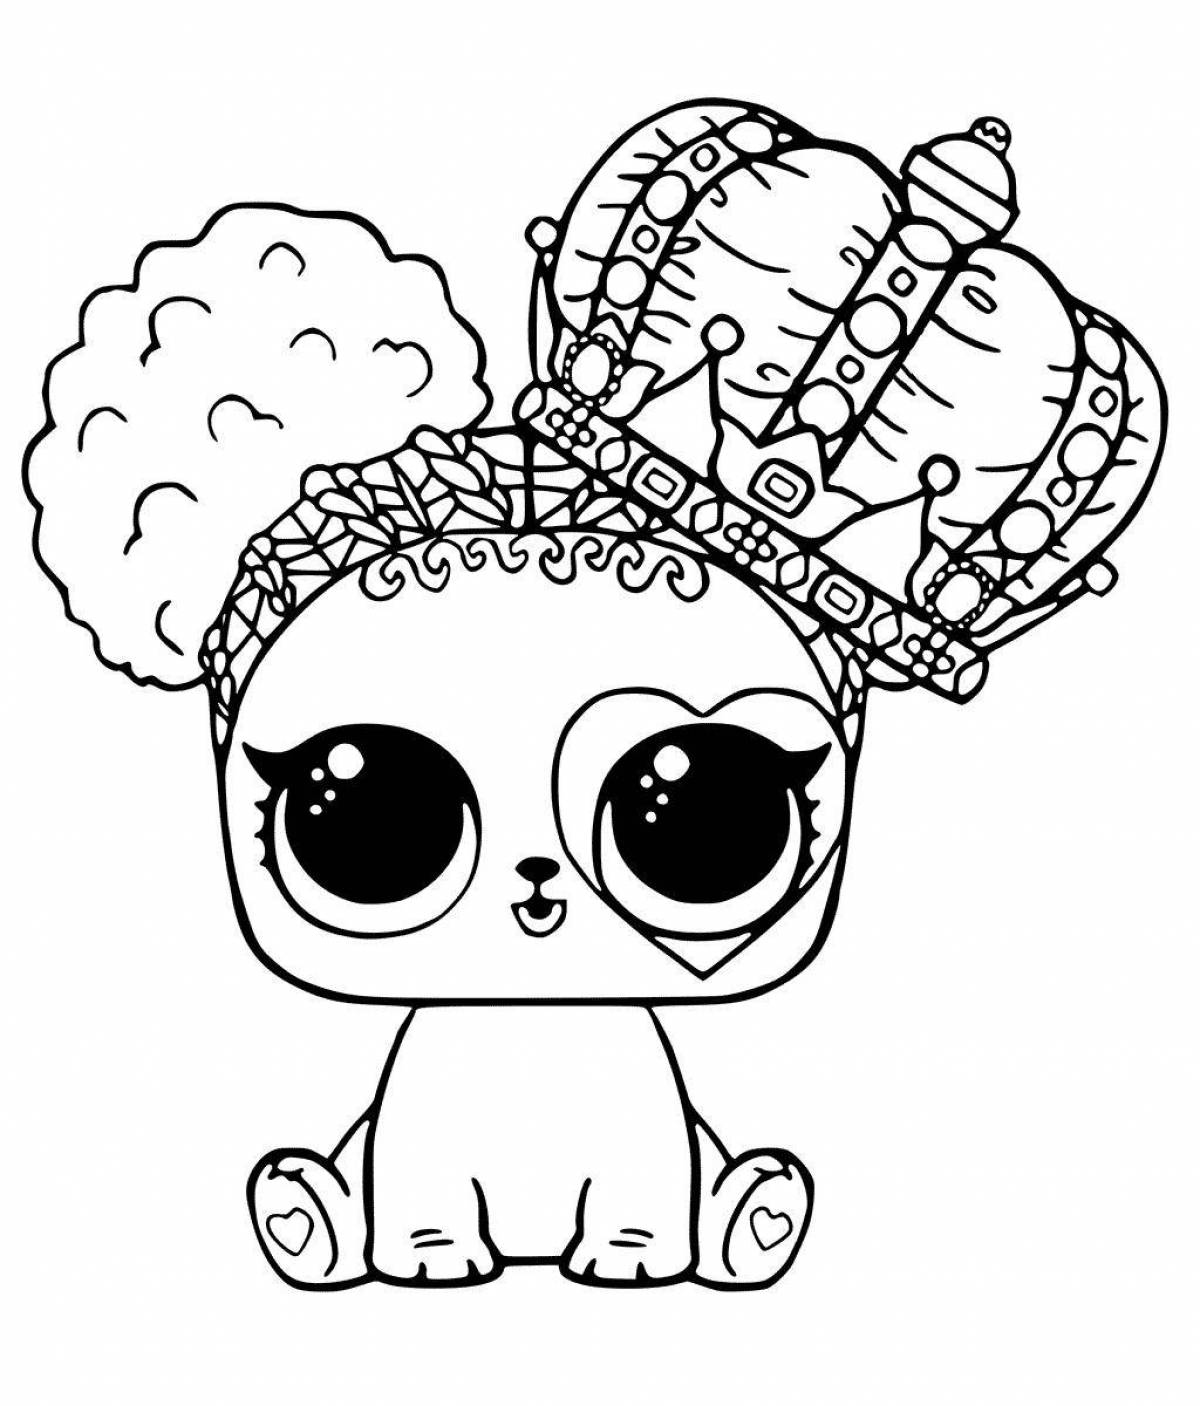 Cute coloring book for lol animals dolls